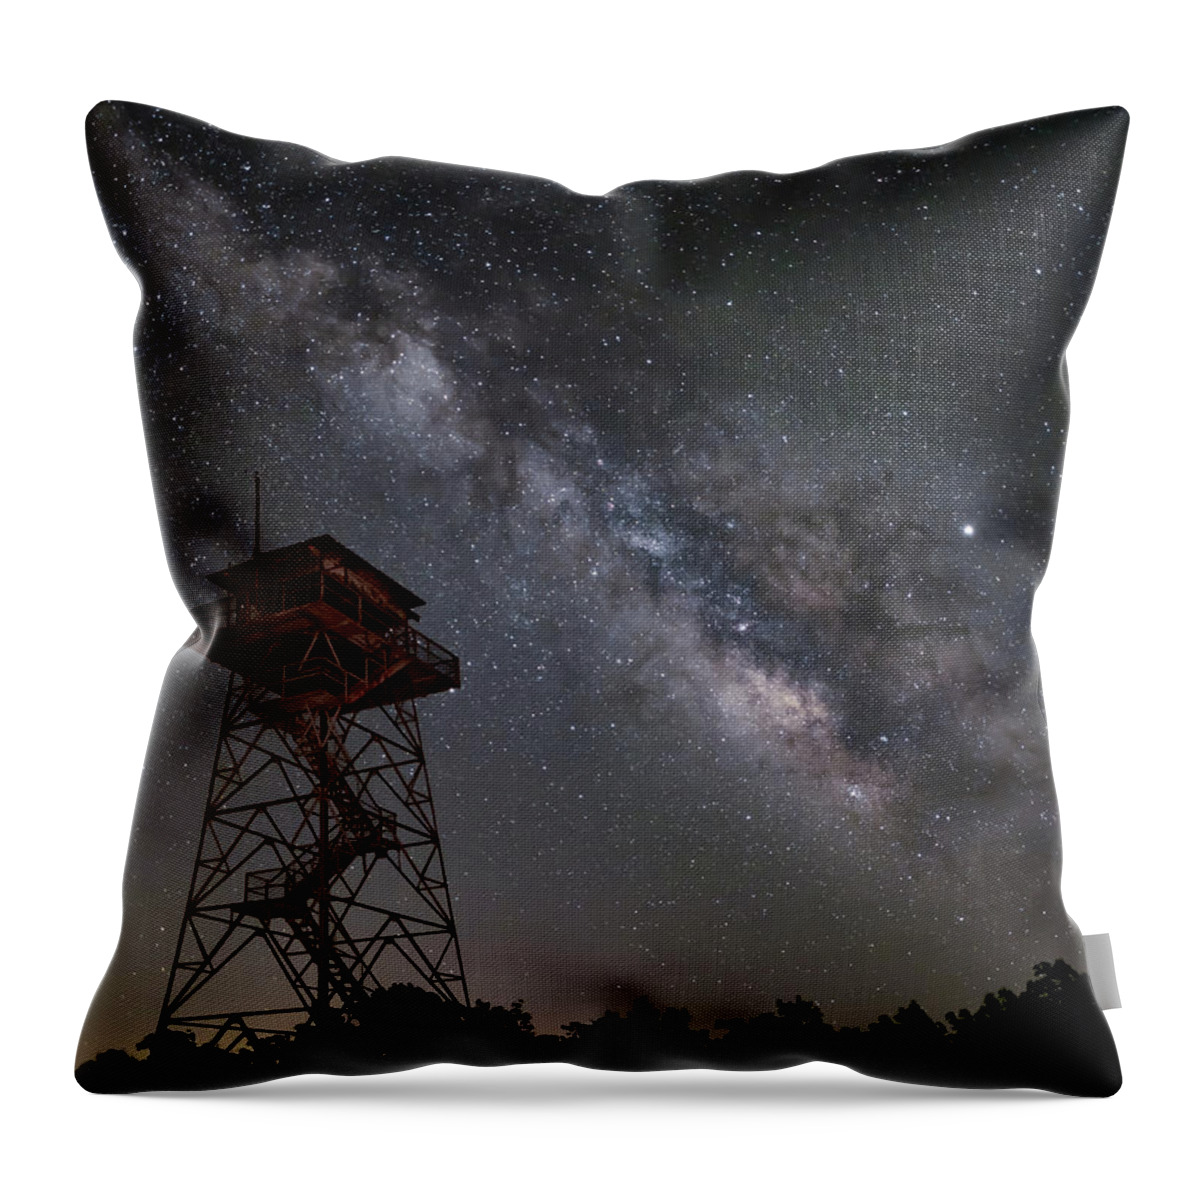 Milky Way Throw Pillow featuring the photograph Fire Tower by James Barber